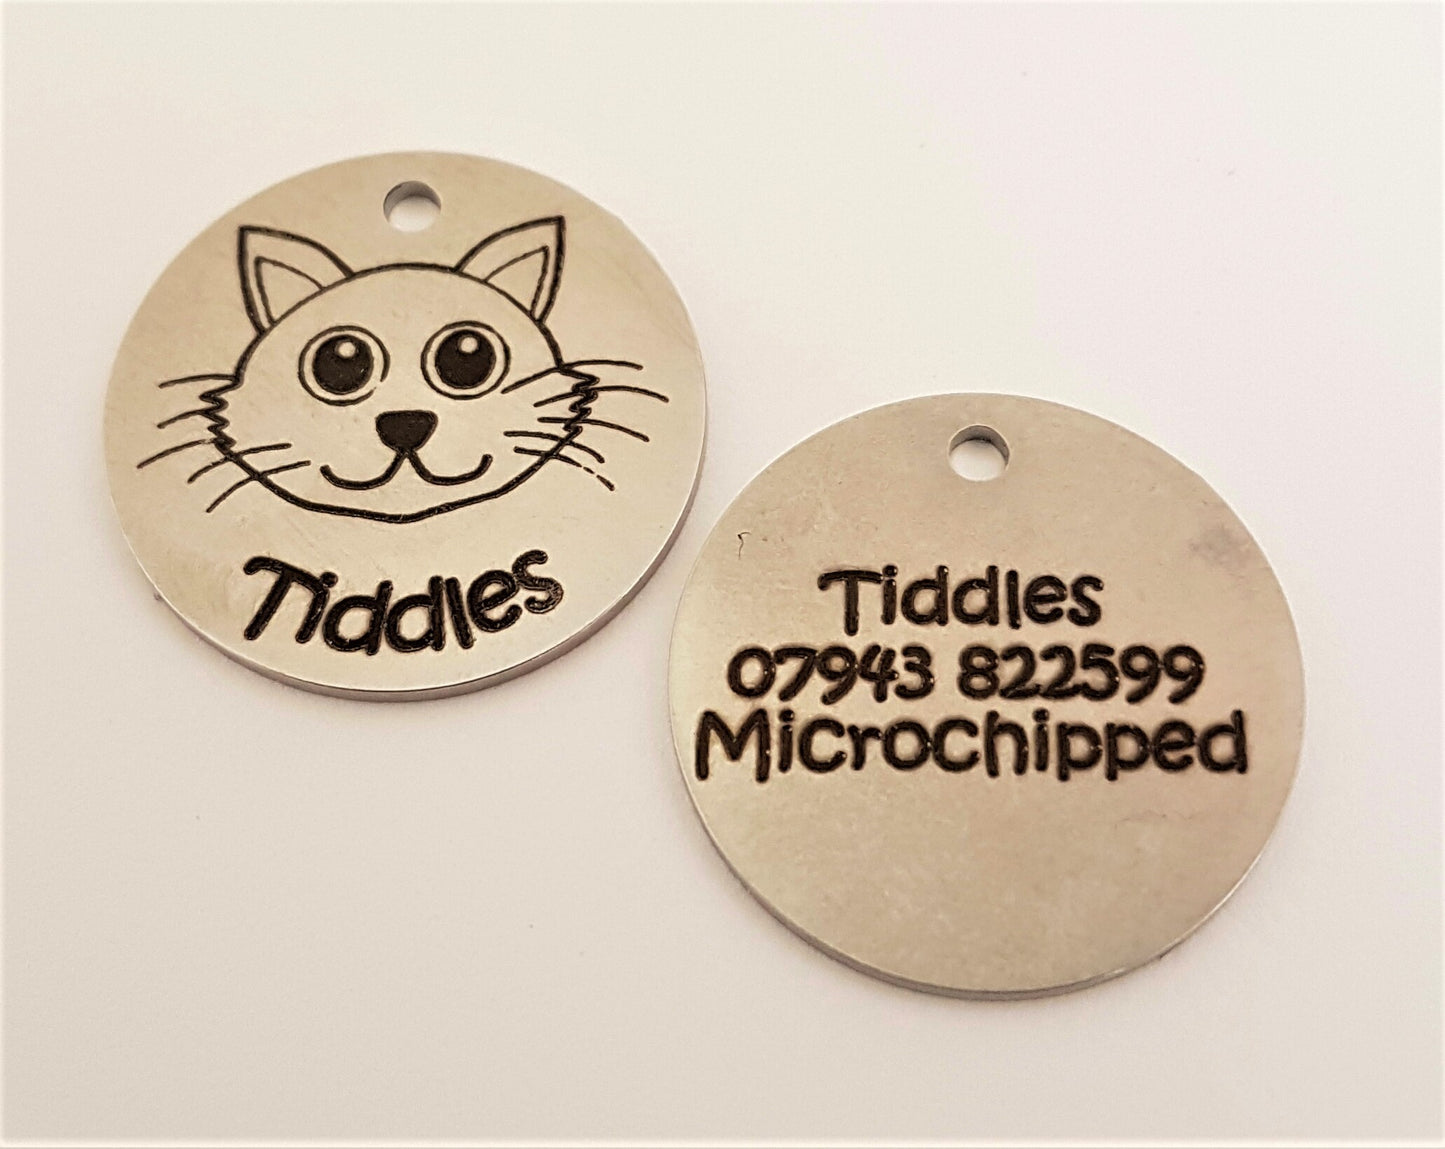 20mm Engraved Stainless Steel "Cat Face" Pet ID Tag / ID Disc